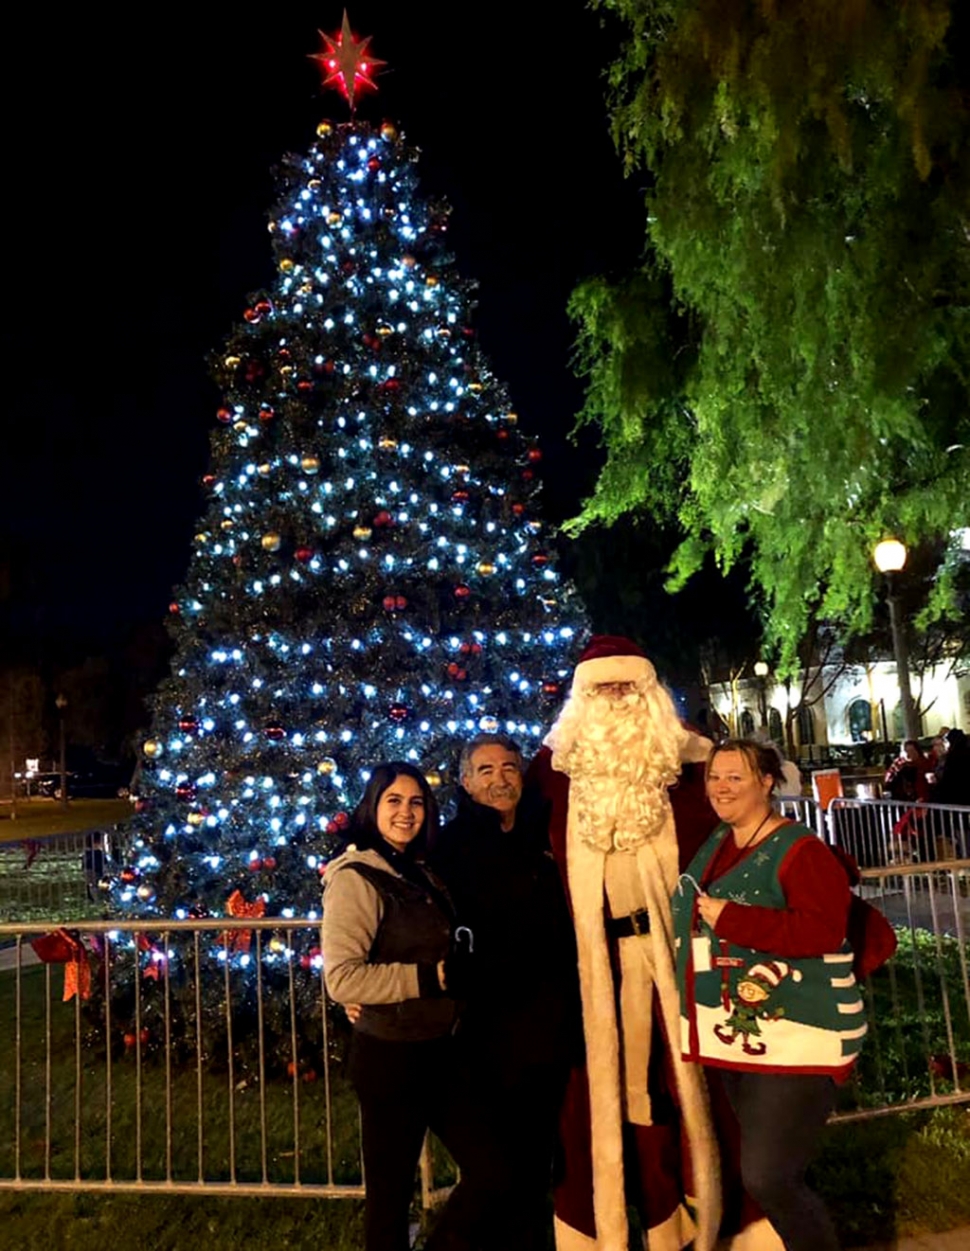 Thank you to all who came out to the 2nd annual City of Fillmore Community Tree Lighting this past Sunday, December 1st. We’d like to thank the Orange Peelers Bell Choir & Sembradores Church Choir for coming out to perform and for giving free hot chocolate, cookies and treats to everyone in attendance! We’d also like to thank Fillmore & Western Railway as an in kind sponsor for this year’s beautiful tree, Diamond Realty & Villegas Public Affairs for tree decorations, Diane and Steve Sutton for the custom star & last but not least City of Fillmore Fire Chief Keith Gurrola and the entire Fillmore City Fire Department for their hard work and dedication to our tree AGAIN this year. Lastly, thank you to Mayor Diane McCall for the appreciation speech and leading our countdown! Lighting the tree this year was Ariana Ocegueda, Miss Fillmore 2019 and her court. There was even a special visit from Santa Claus thank you Santa for making a special stop in Fillmore for Fillmore’s Community Tree Lighting! [Courtesy City of Fillmore Facebook Page]